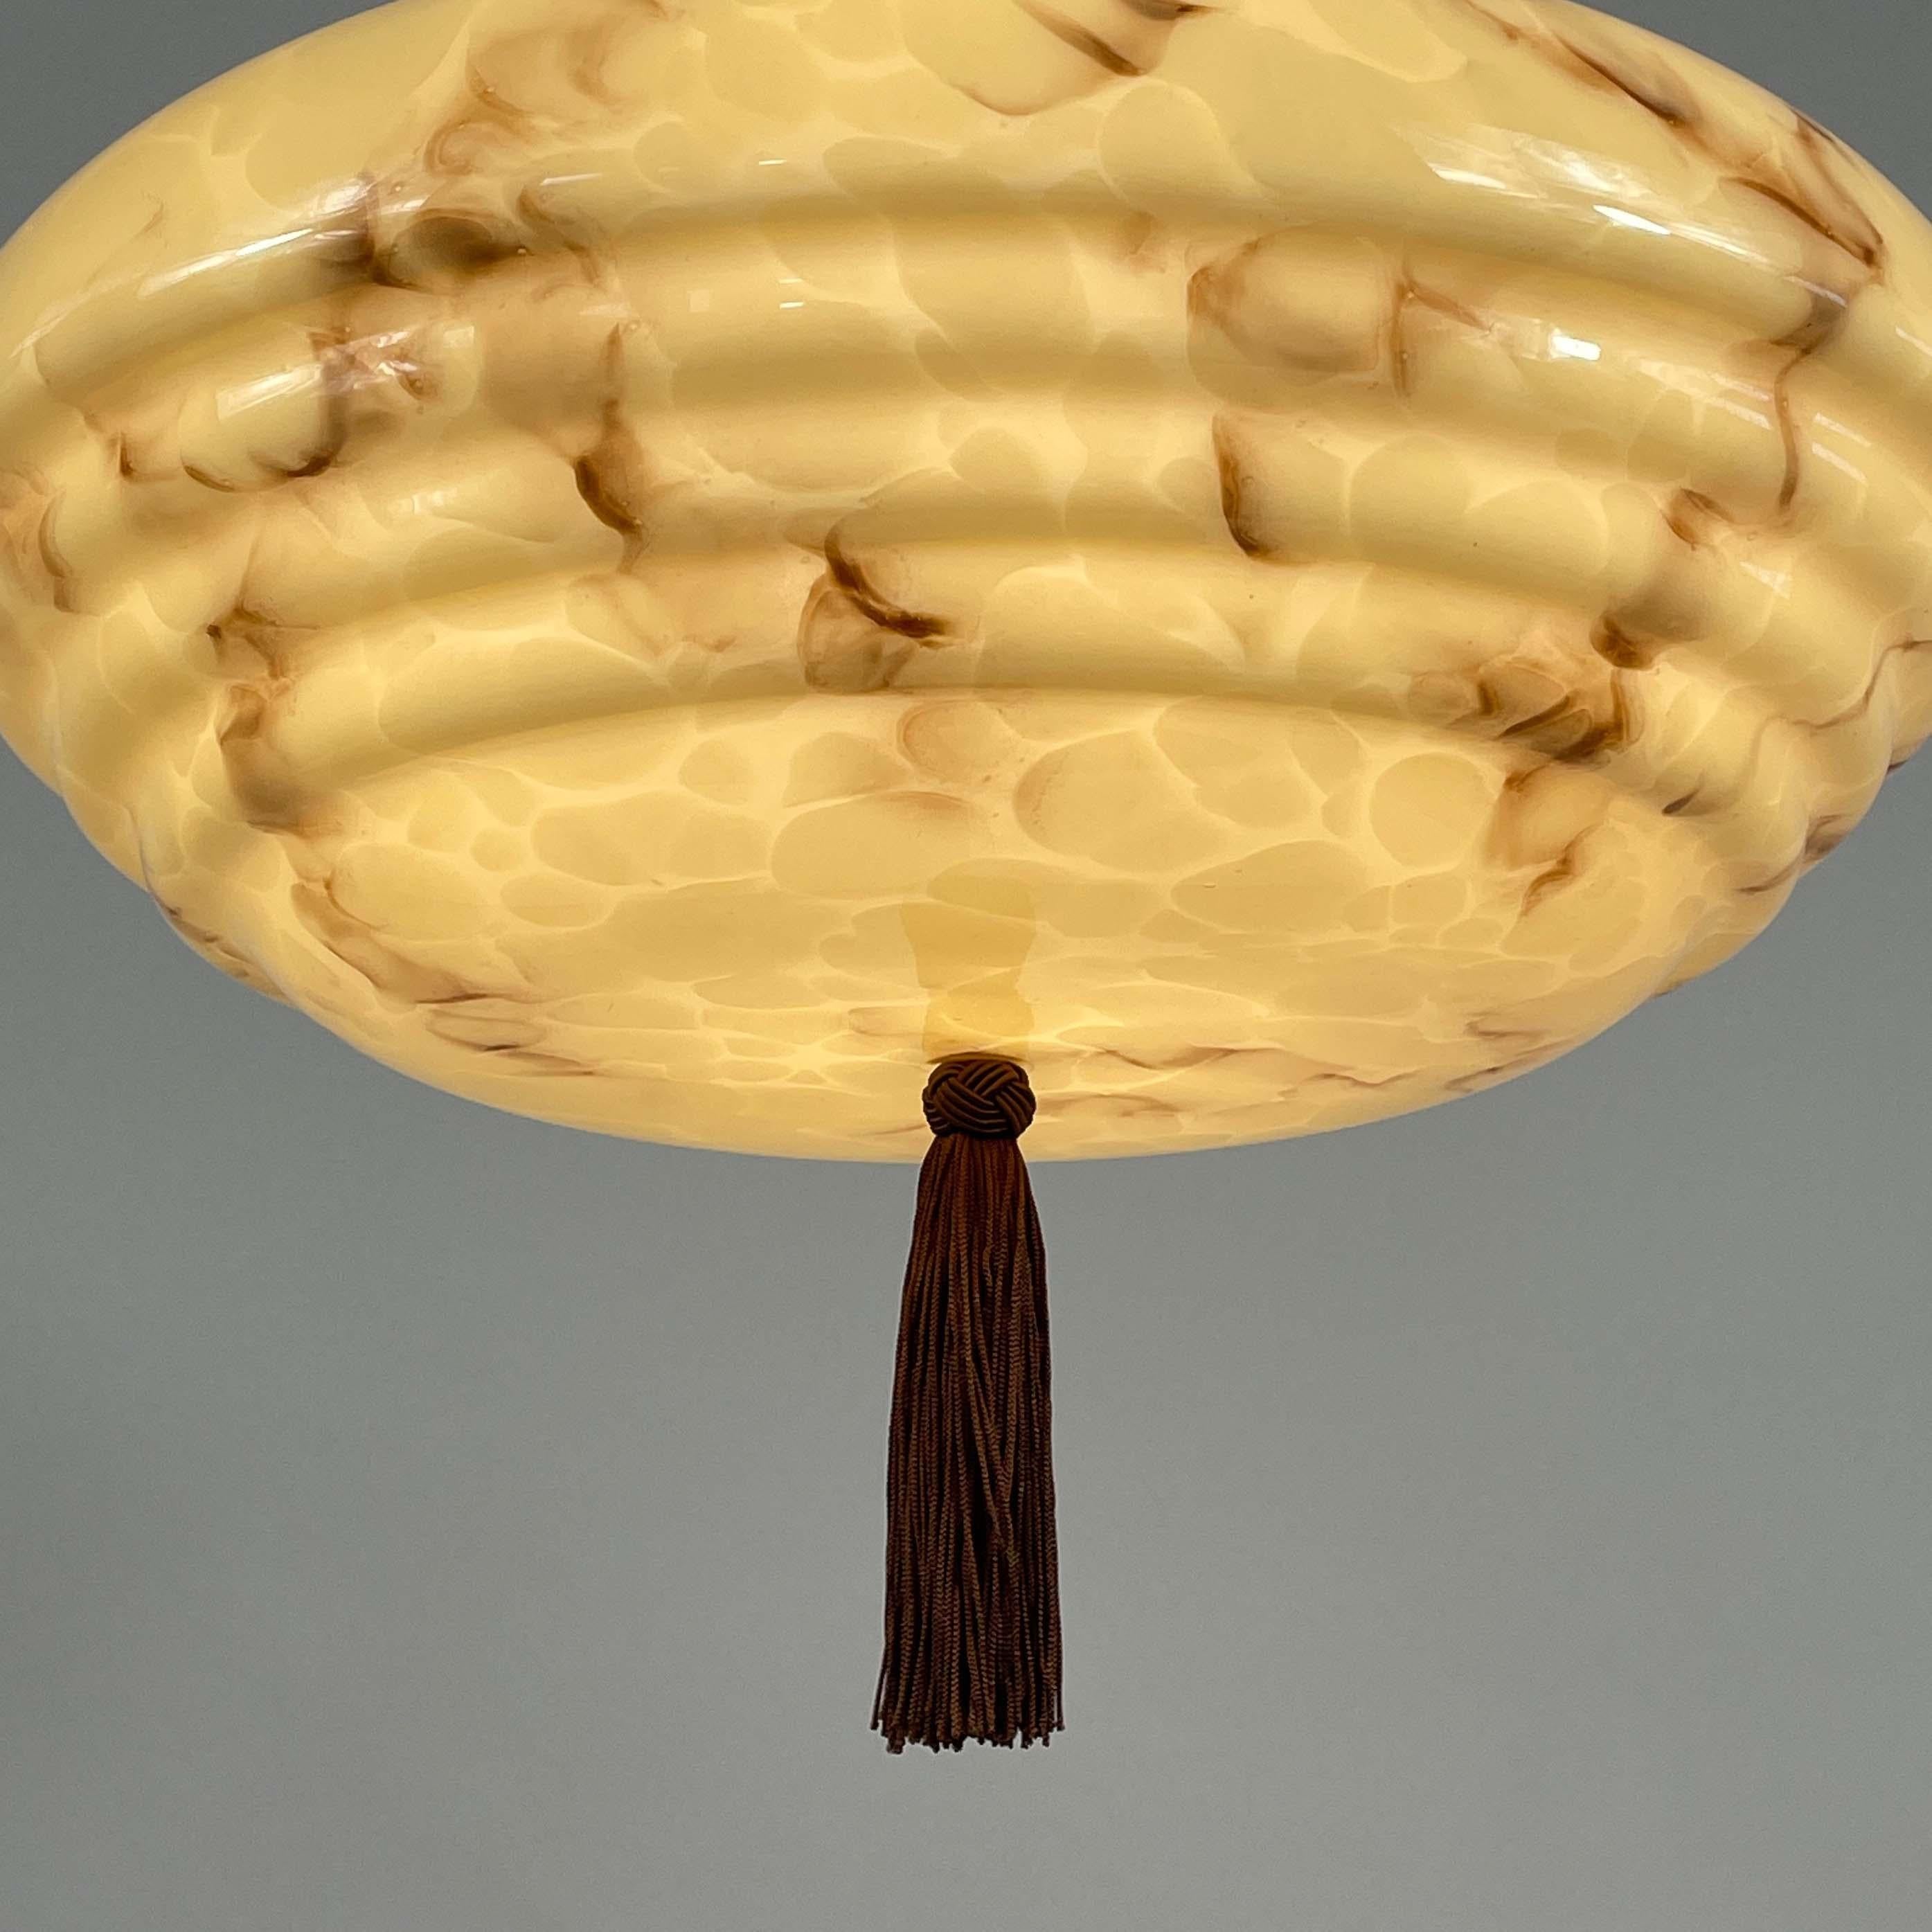 Art Deco Marbled Cream Opaline & Bronze Pendant with Tassel, Germany 1920s 1930s For Sale 4